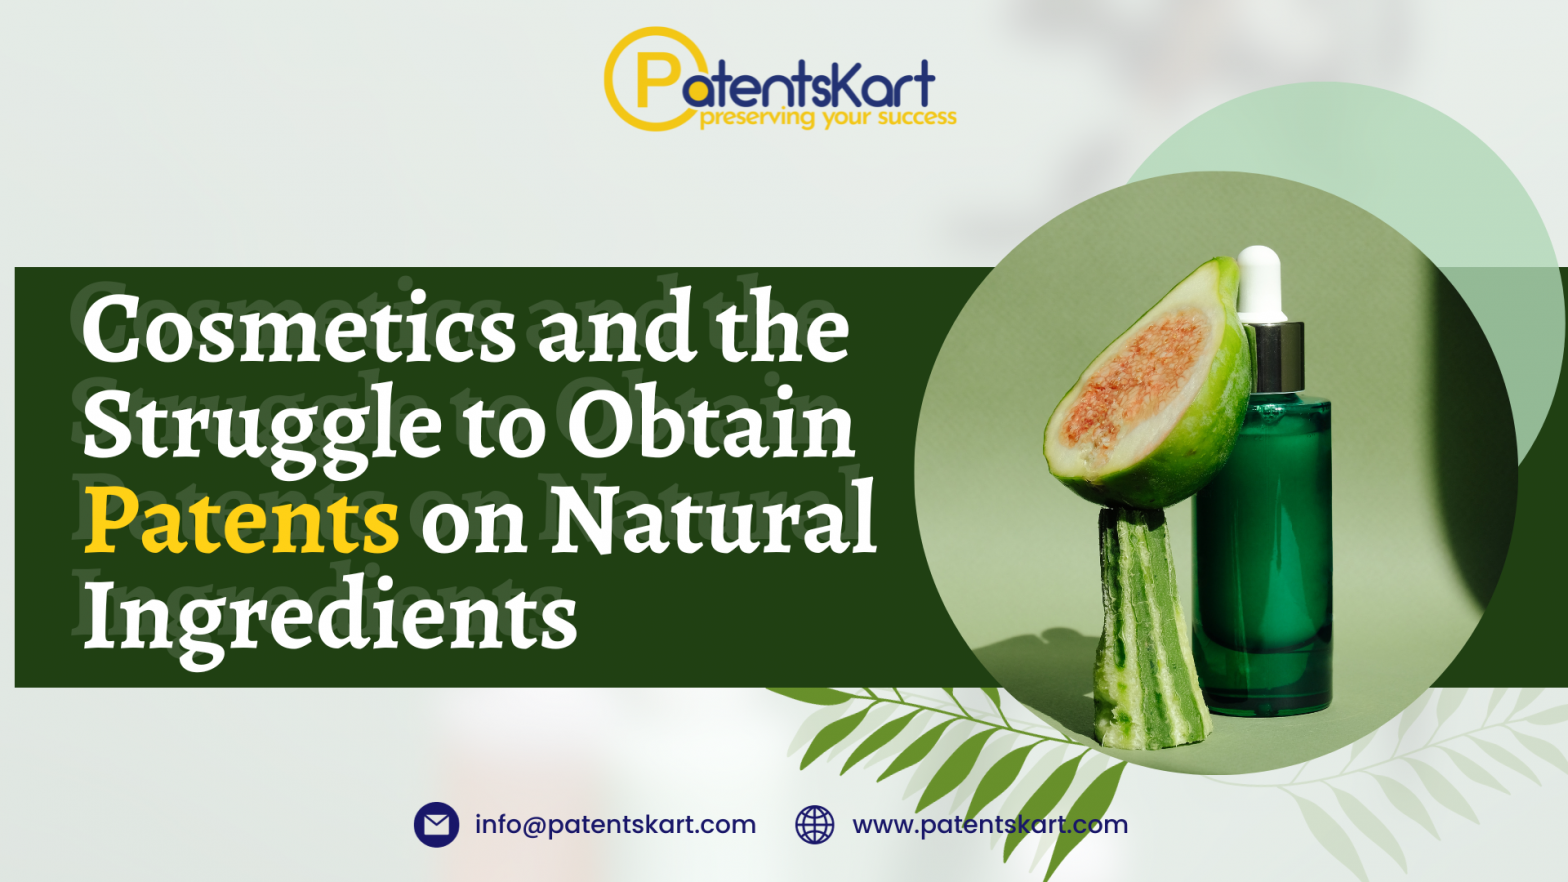 Patents patent support services Patents on Natural Ingredients